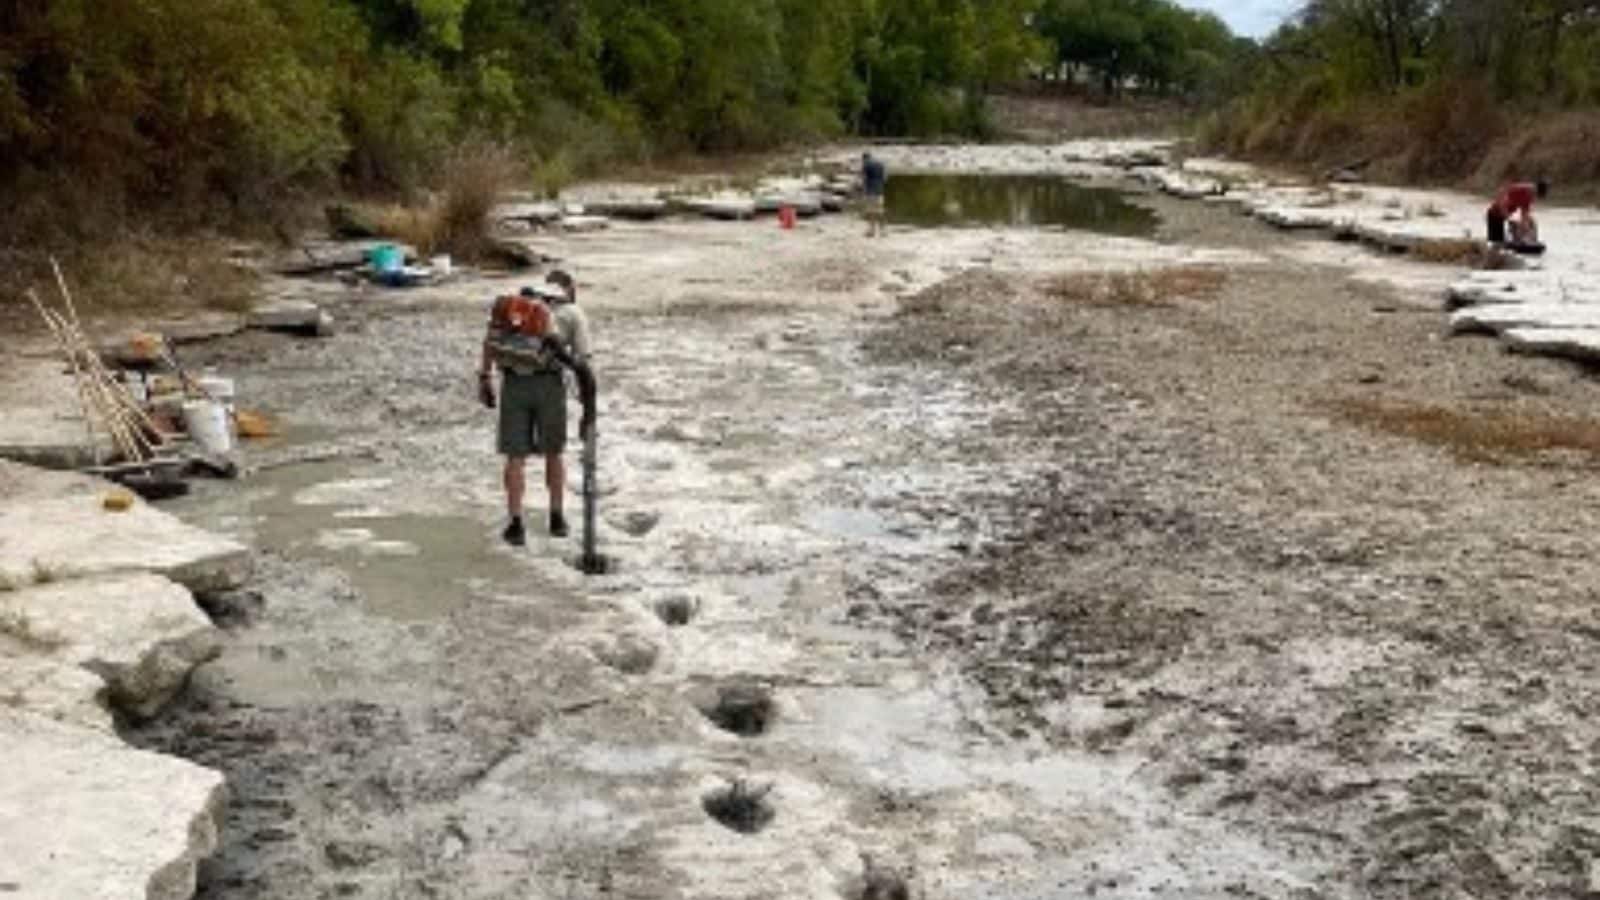 Texas Drought Uncovers 'One of Longest Dinosaur Tracks in World' at National Park